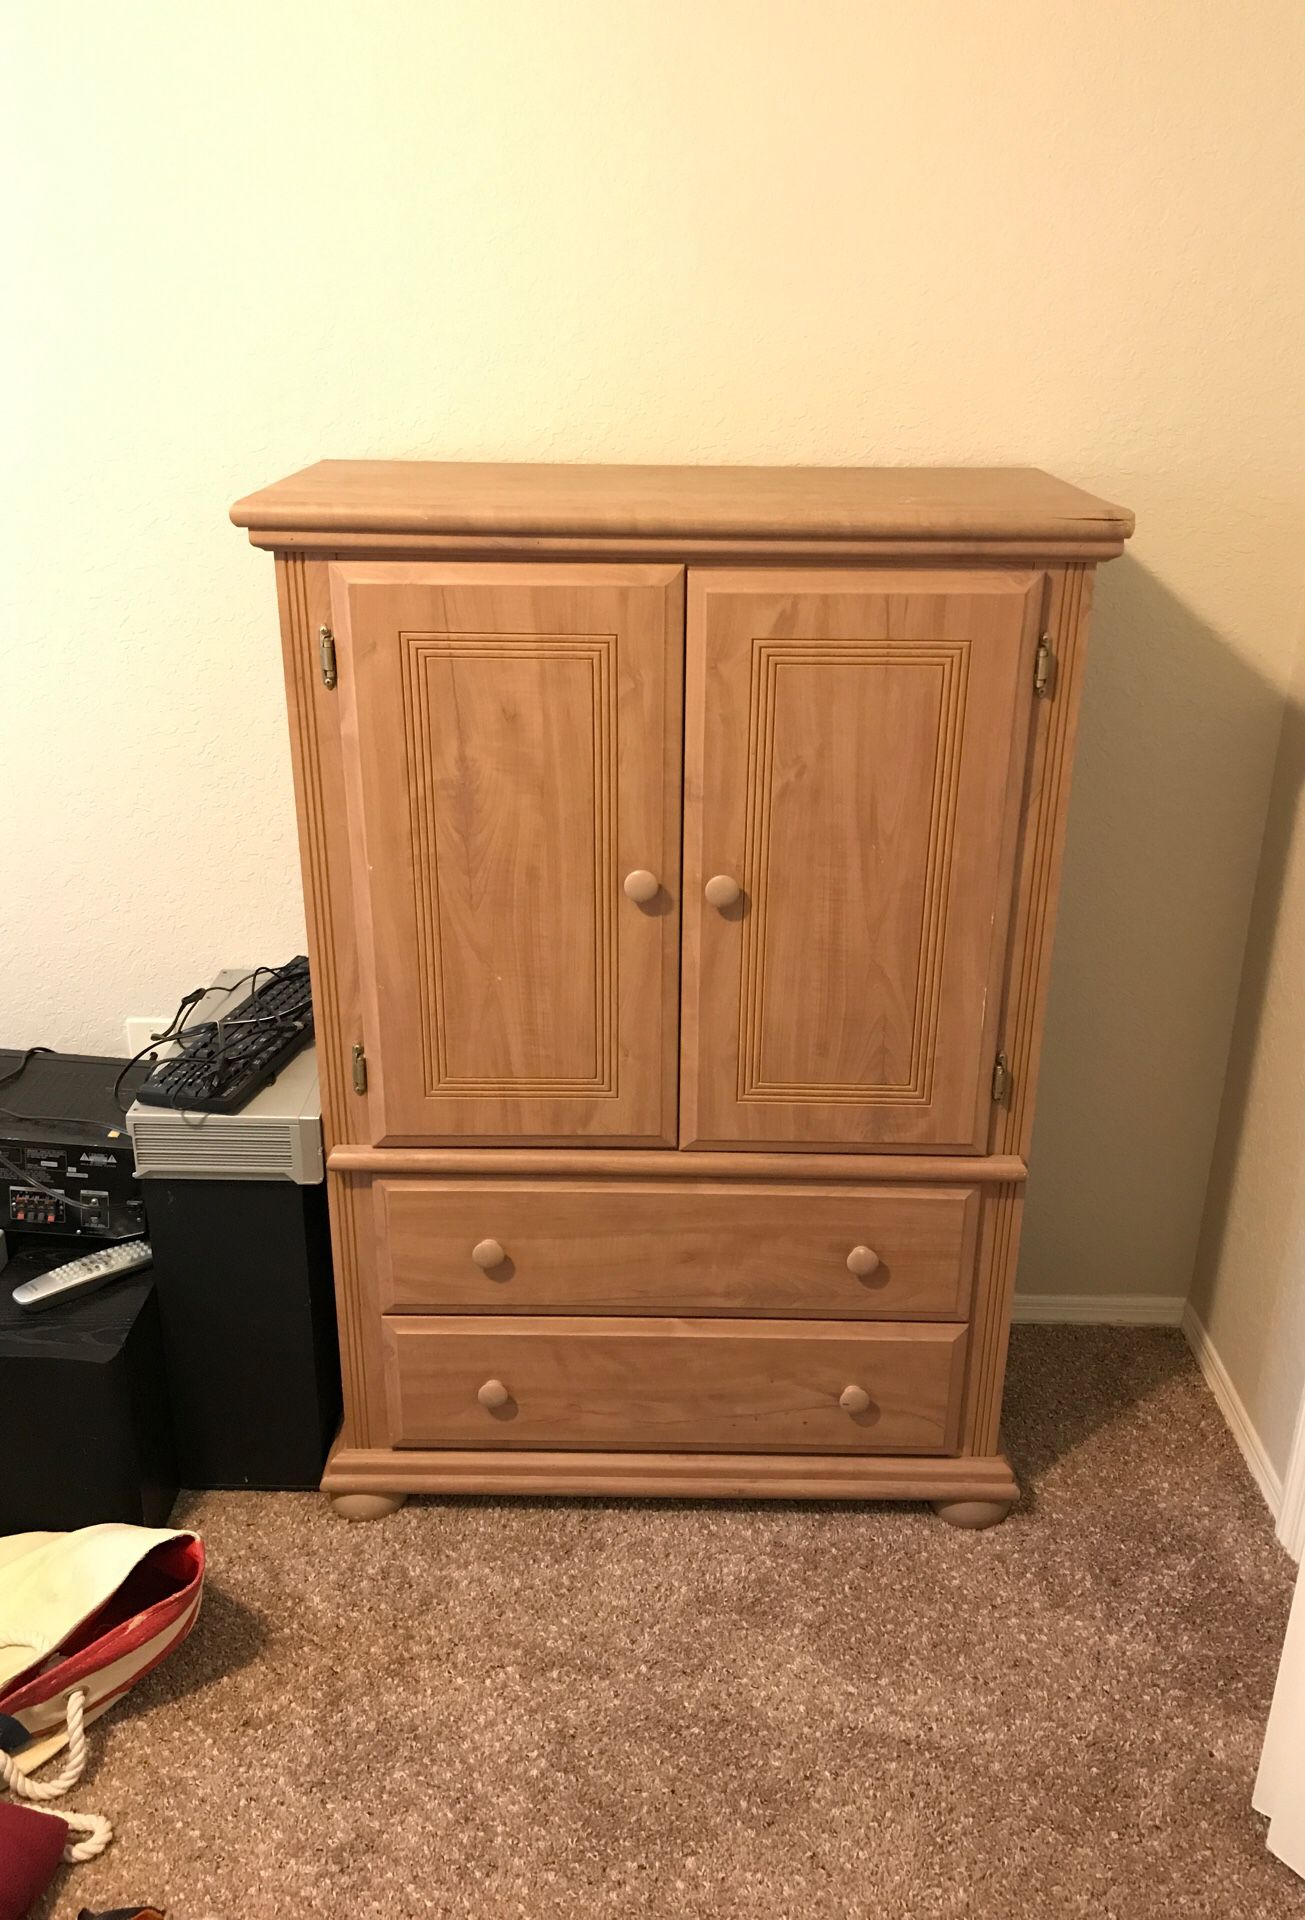 Dresser/Armoire/TV Cabinet with 2 matching bedside cabinets